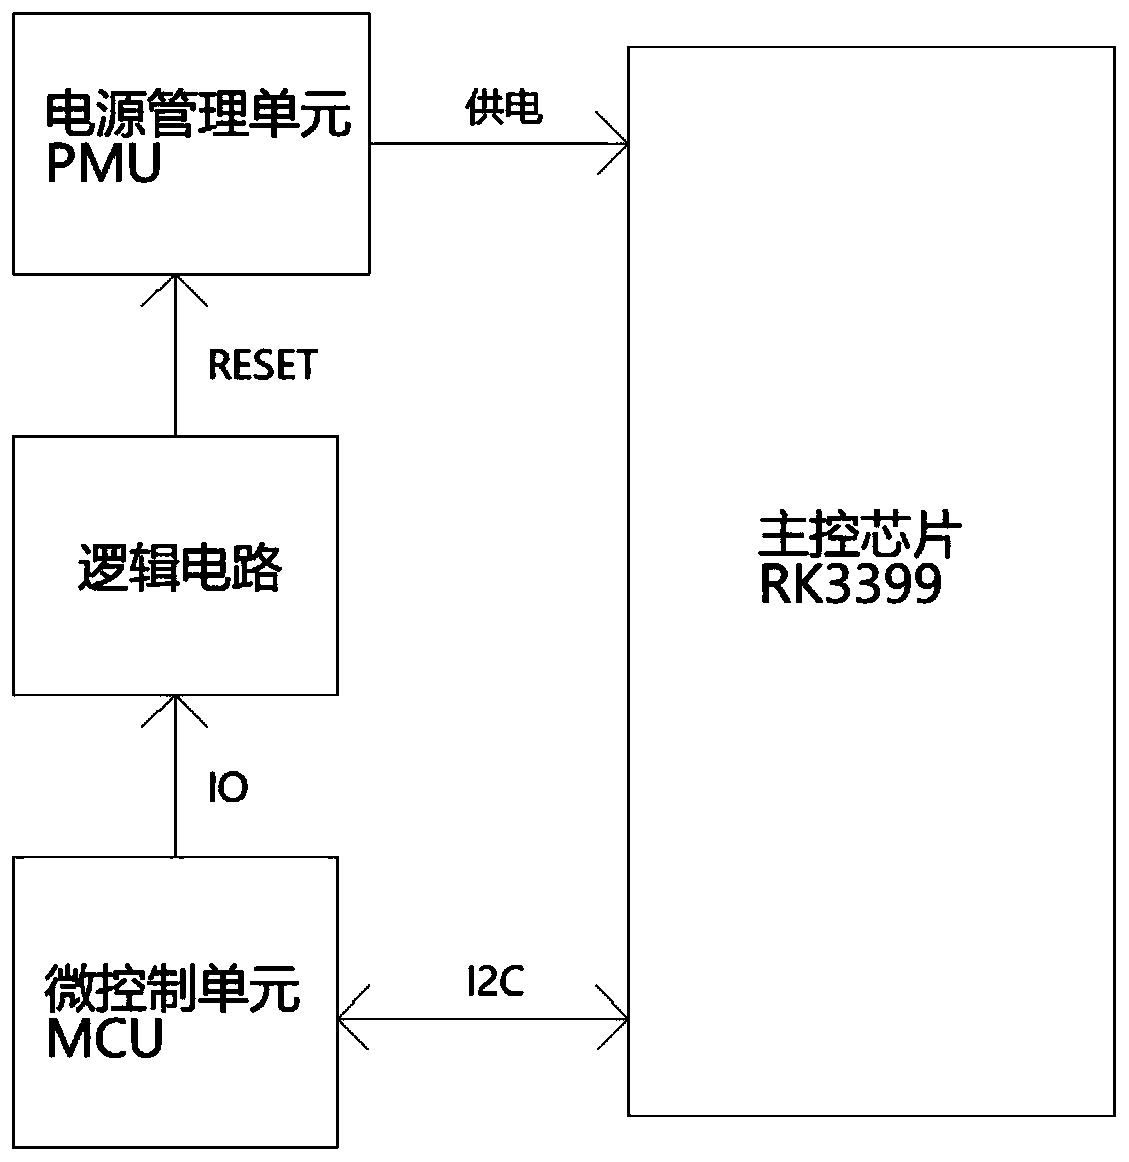 System and method for realizing automatic restart and recovery of crash of RK3399 mainboard